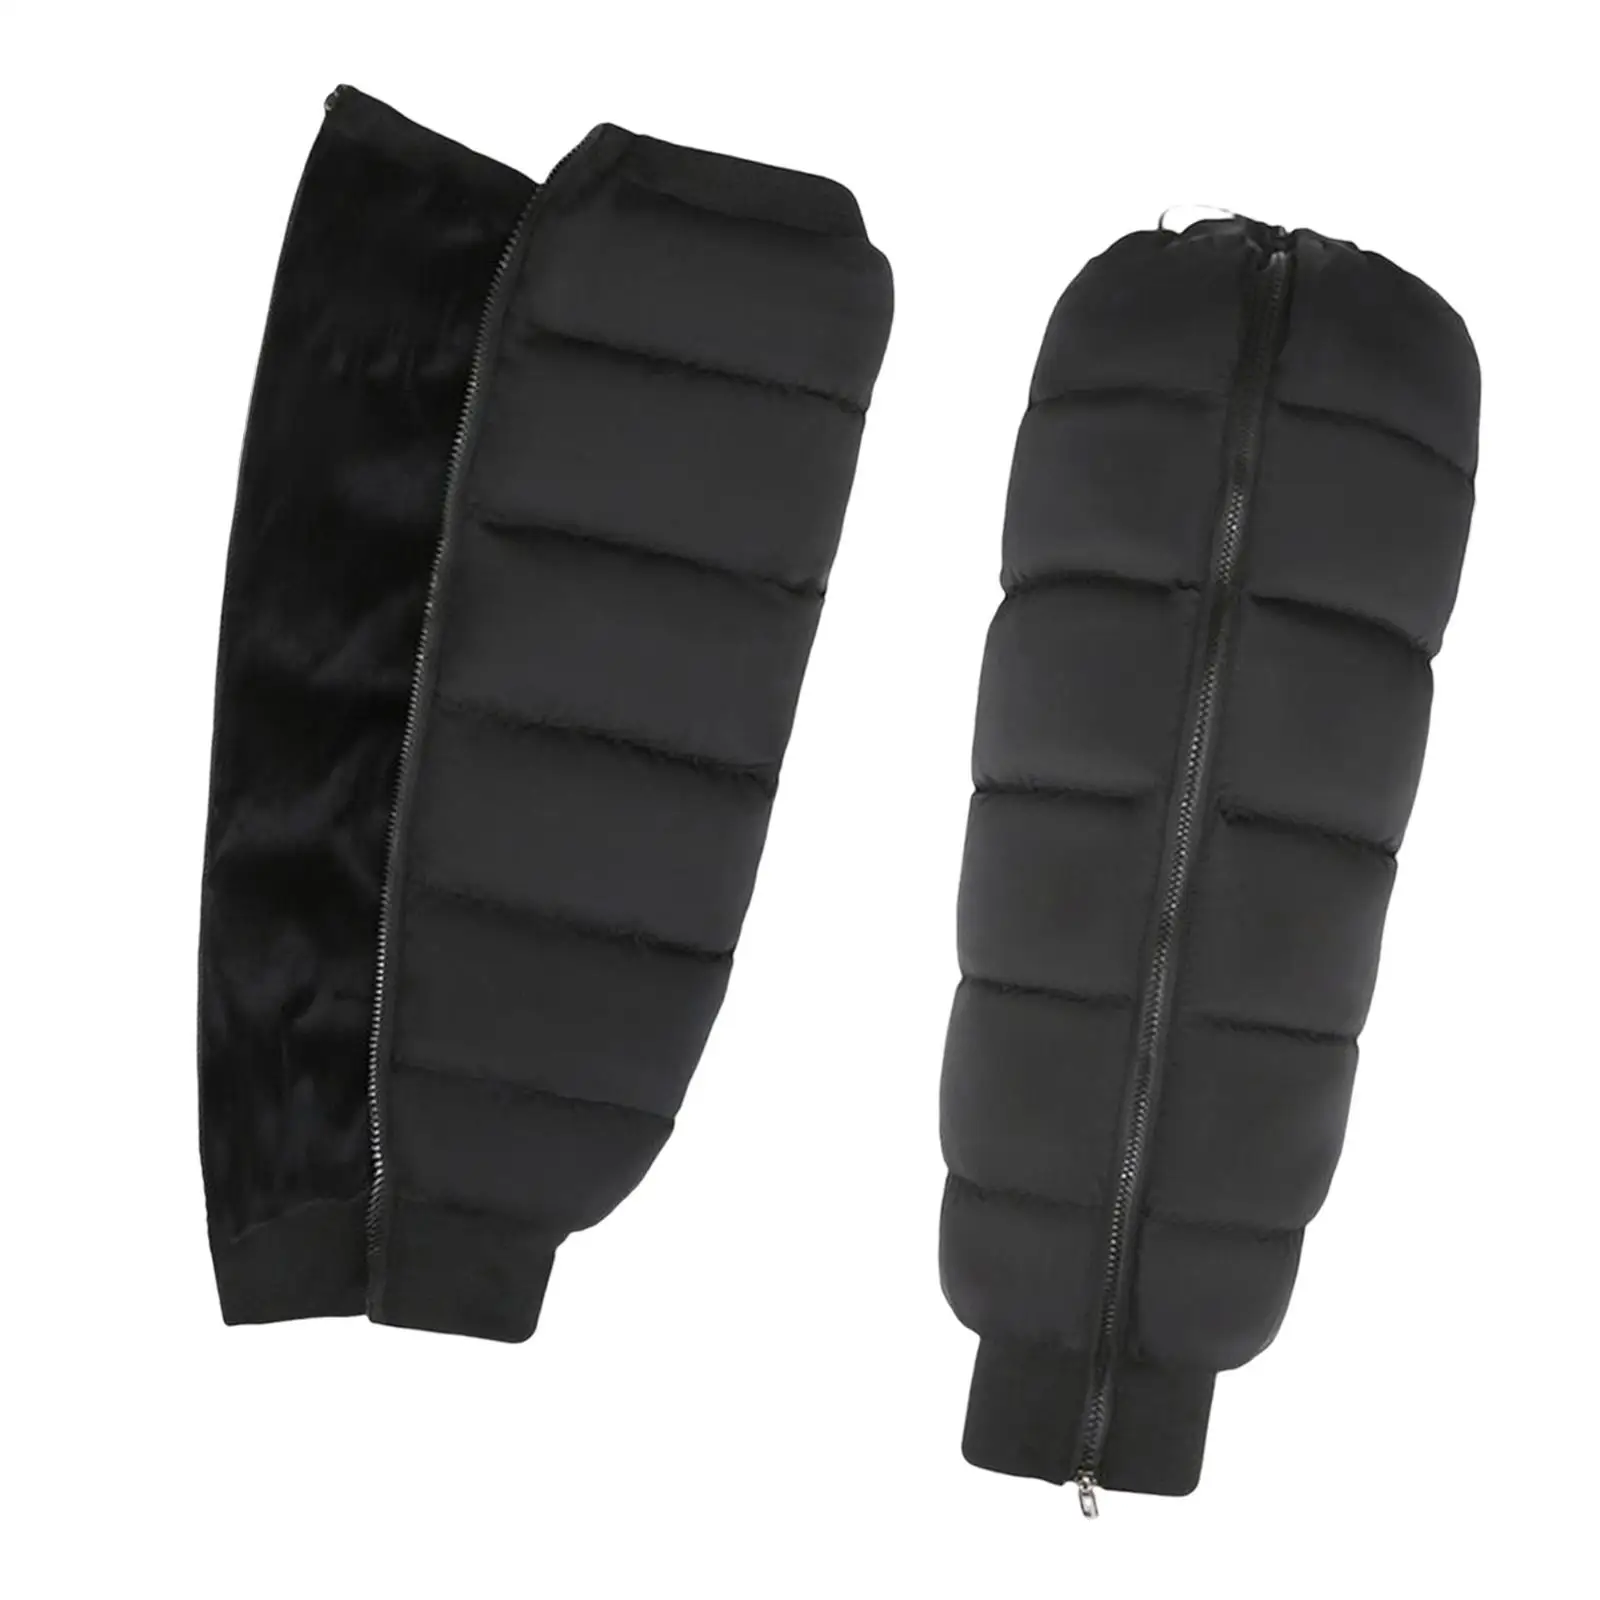 2Pcs Winter Knee Pads Protective Unisex Leggings Protector for Riding Skiing